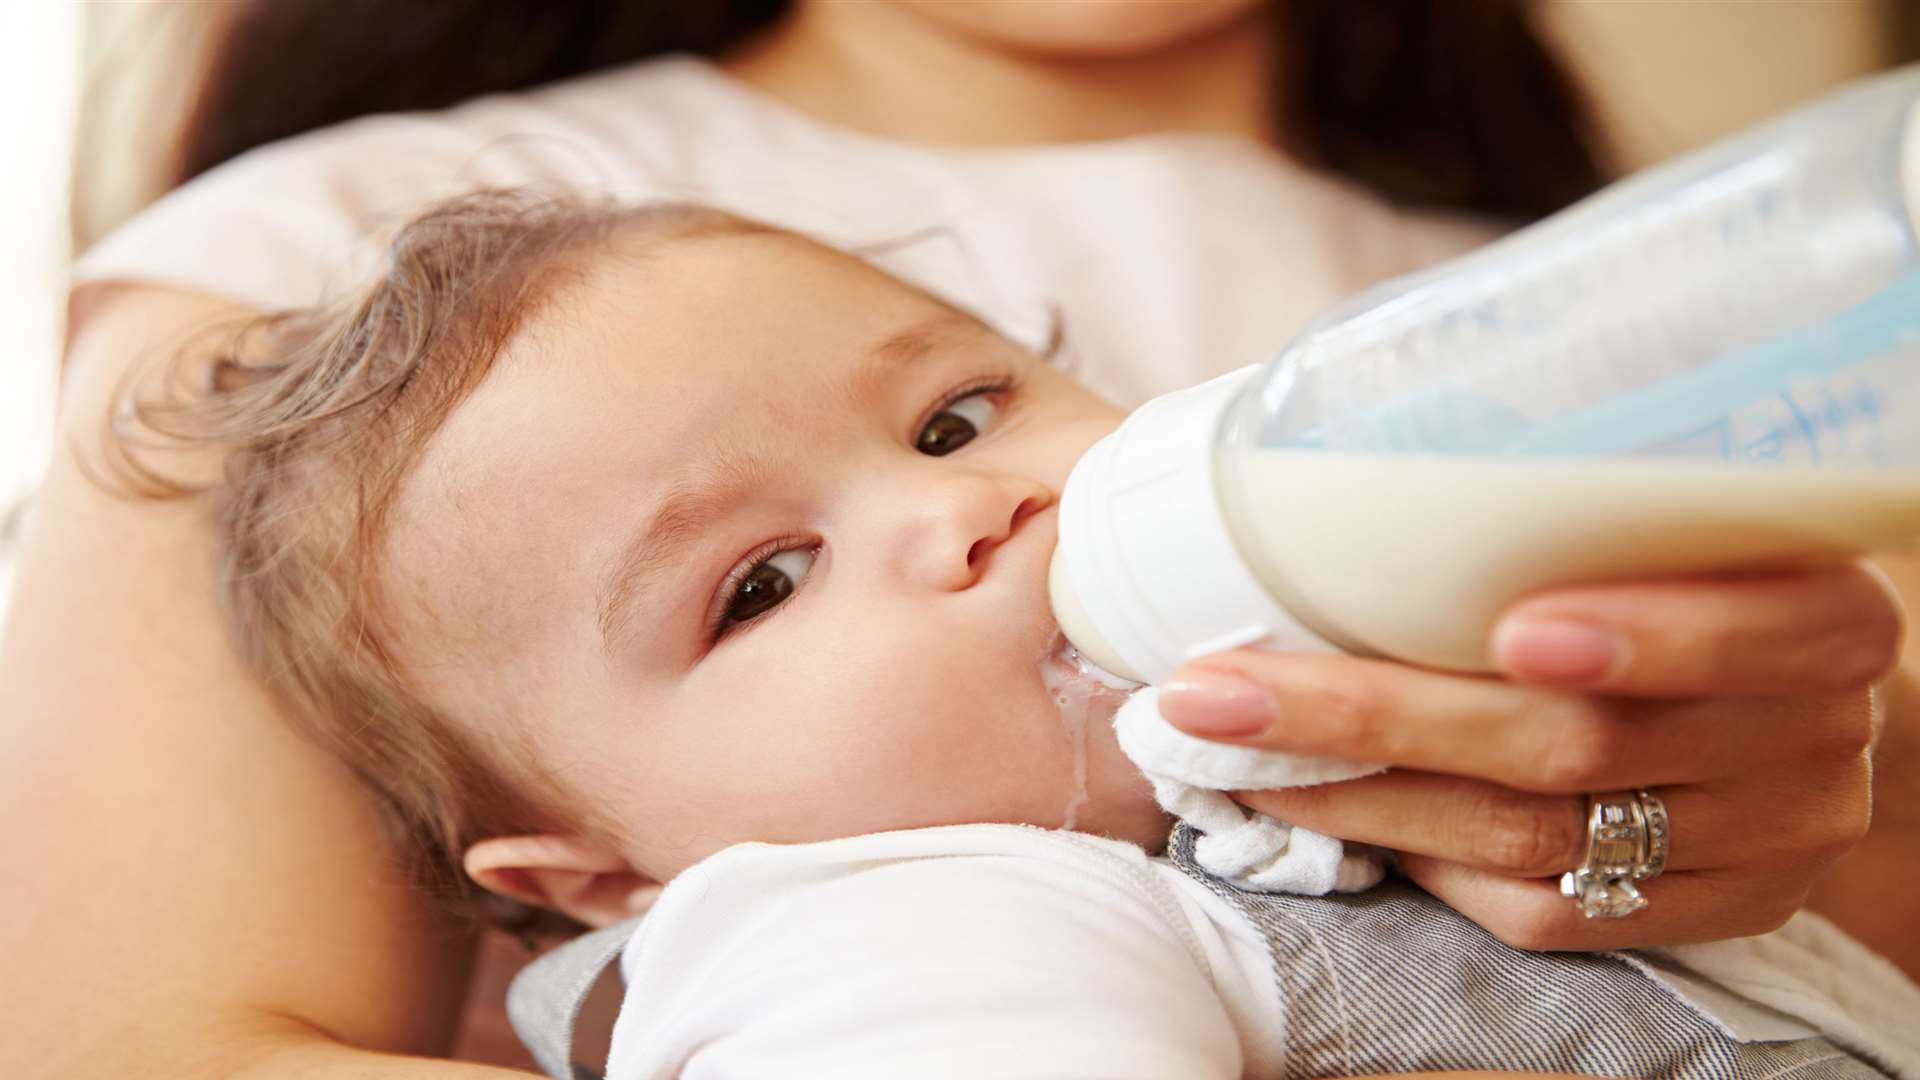 It's important when bottle feeding to be sensitive to the amount of milk your baby really needs